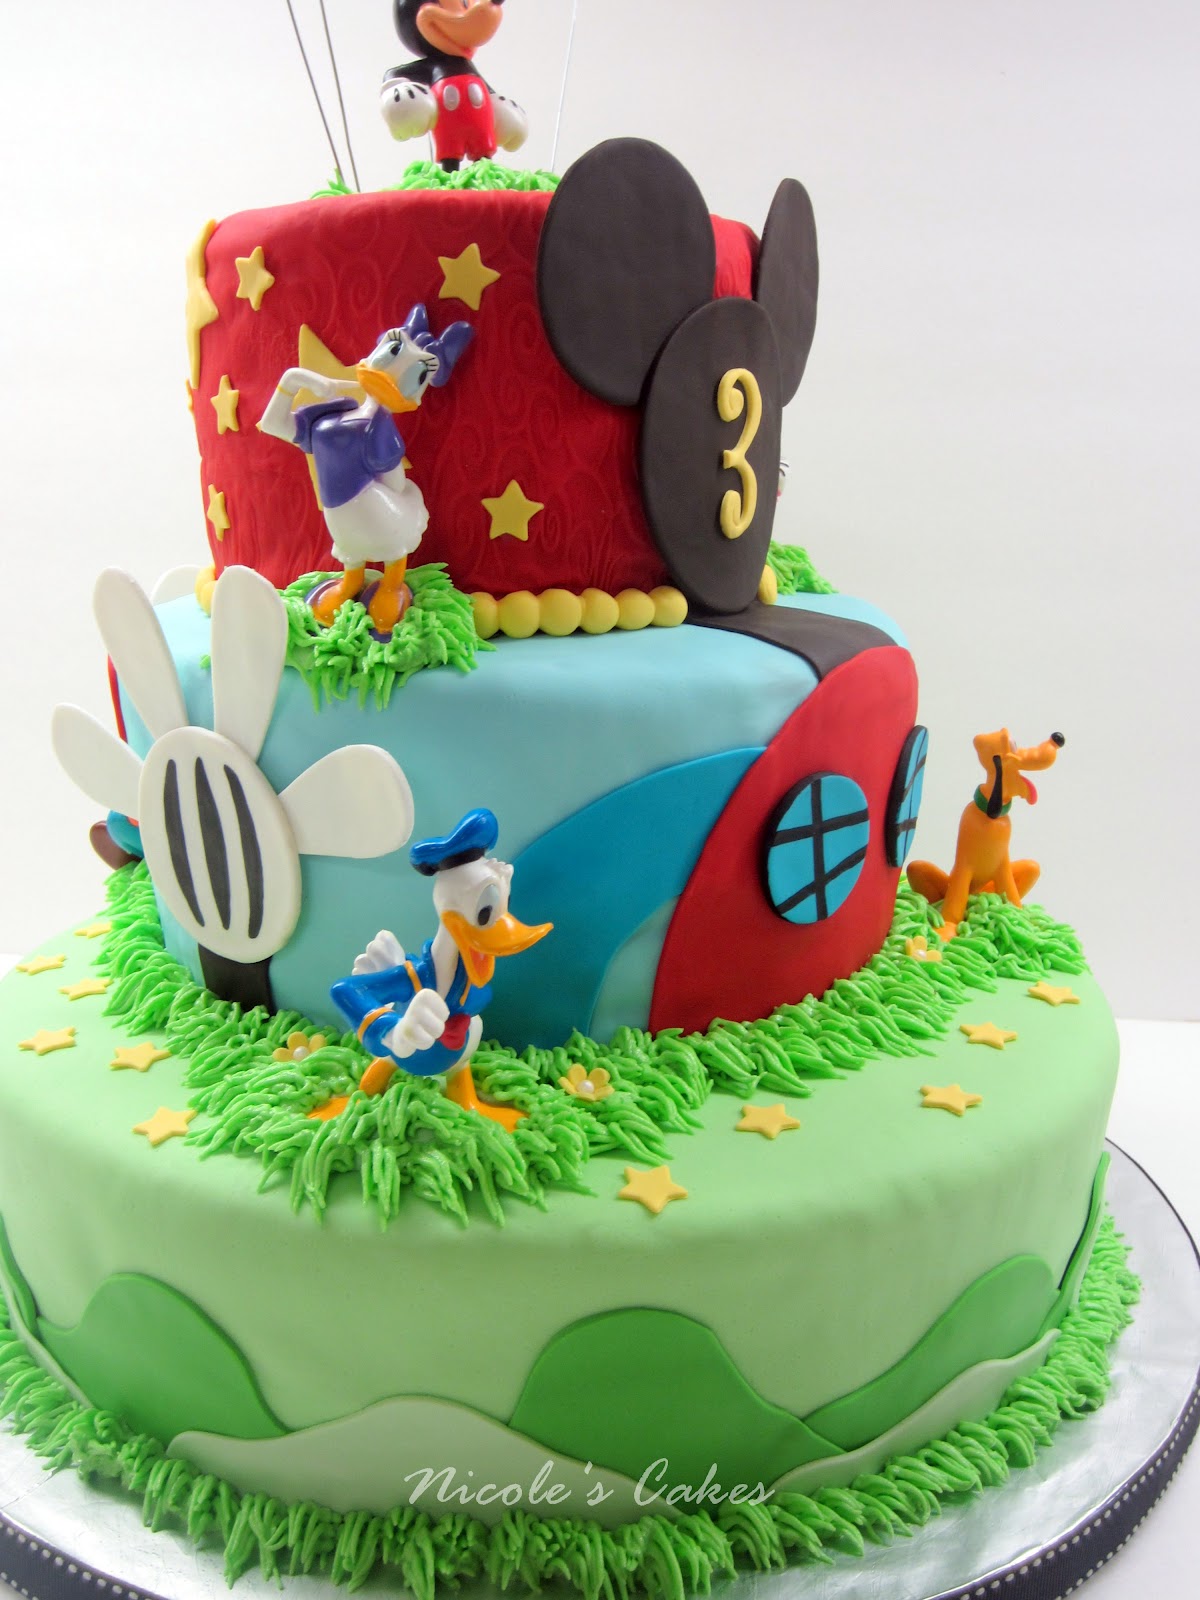 On Birthday Cakes Mickey Mouse Clubhouse 3 Tier Cake!